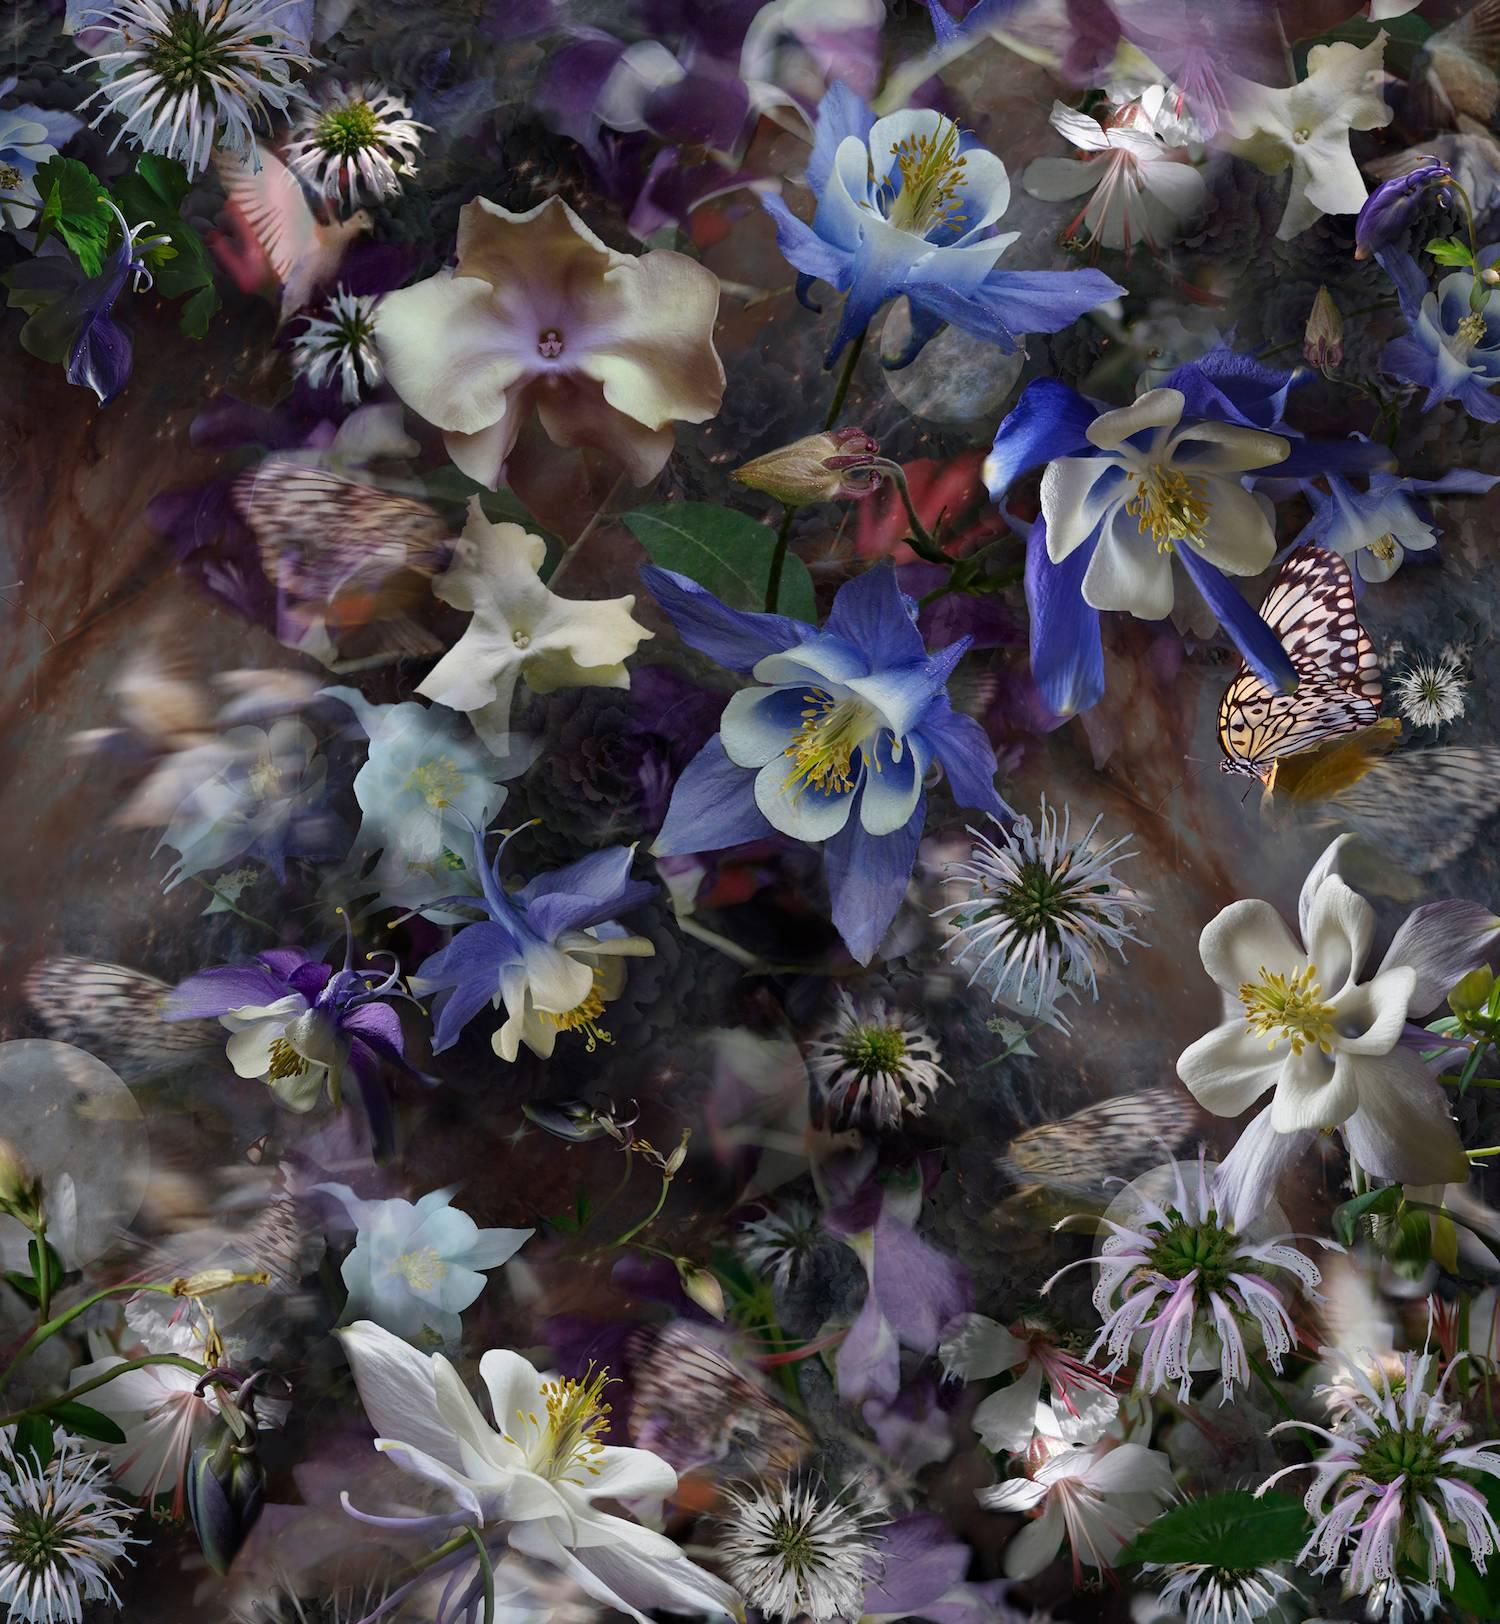 Lisa A. Frank Color Photograph - Columbine: The Mystery of Five Doves, Layered Images of Flowers in Violet Blue